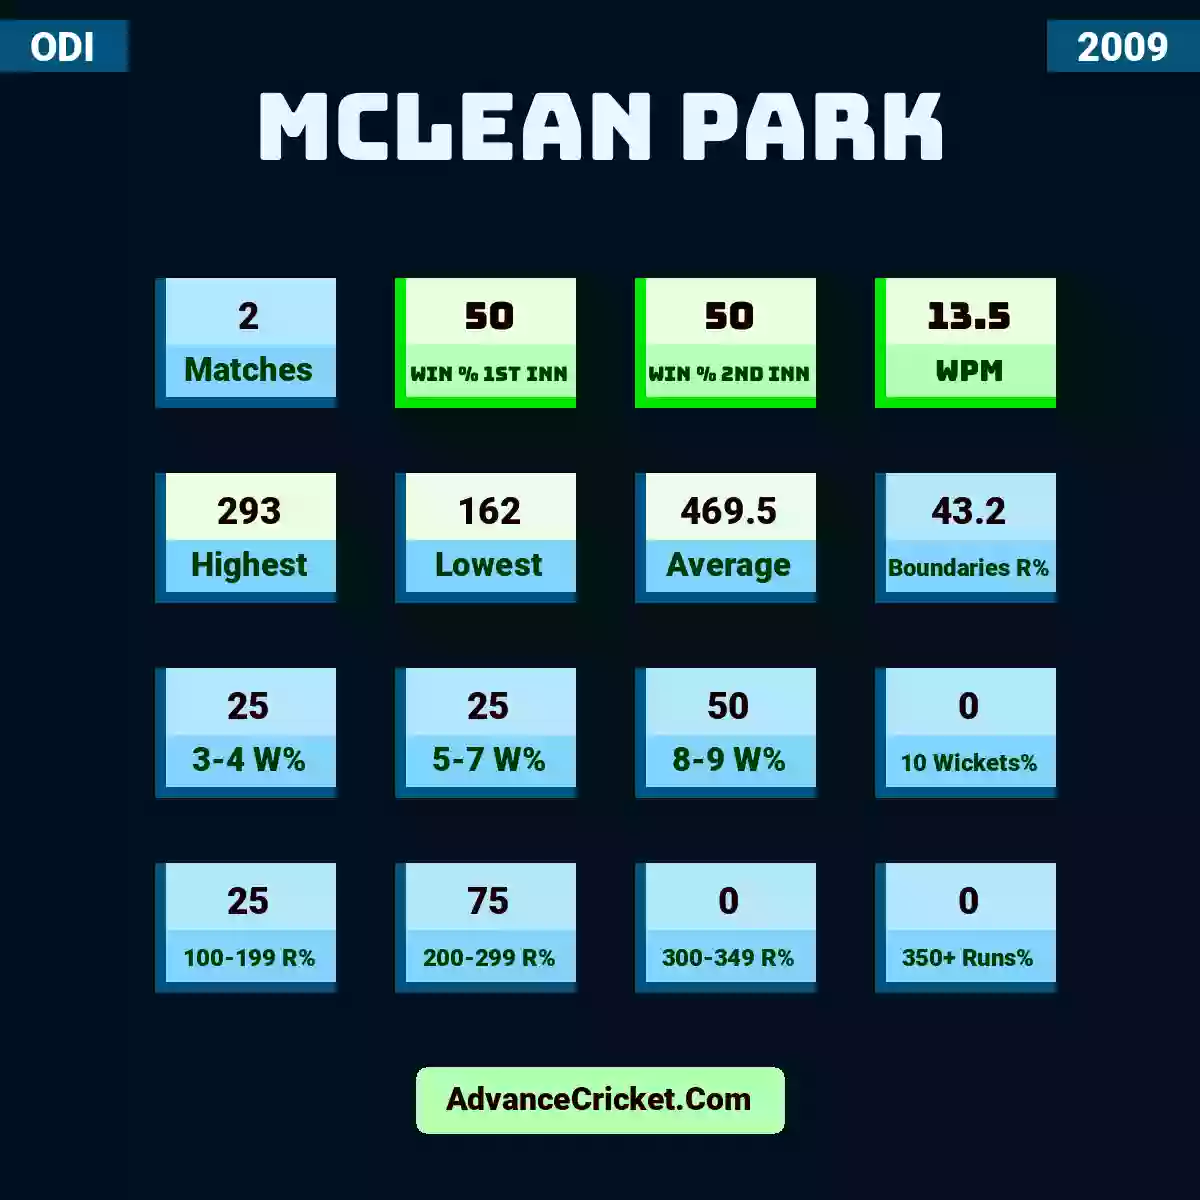 Image showing McLean Park with Matches: 2, Win % 1st Inn: 50, Win % 2nd Inn: 50, WPM: 13.5, Highest: 293, Lowest: 162, Average: 469.5, Boundaries R%: 43.2, 3-4 W%: 25, 5-7 W%: 25, 8-9 W%: 50, 10 Wickets%: 0, 100-199 R%: 25, 200-299 R%: 75, 300-349 R%: 0, 350+ Runs%: 0.